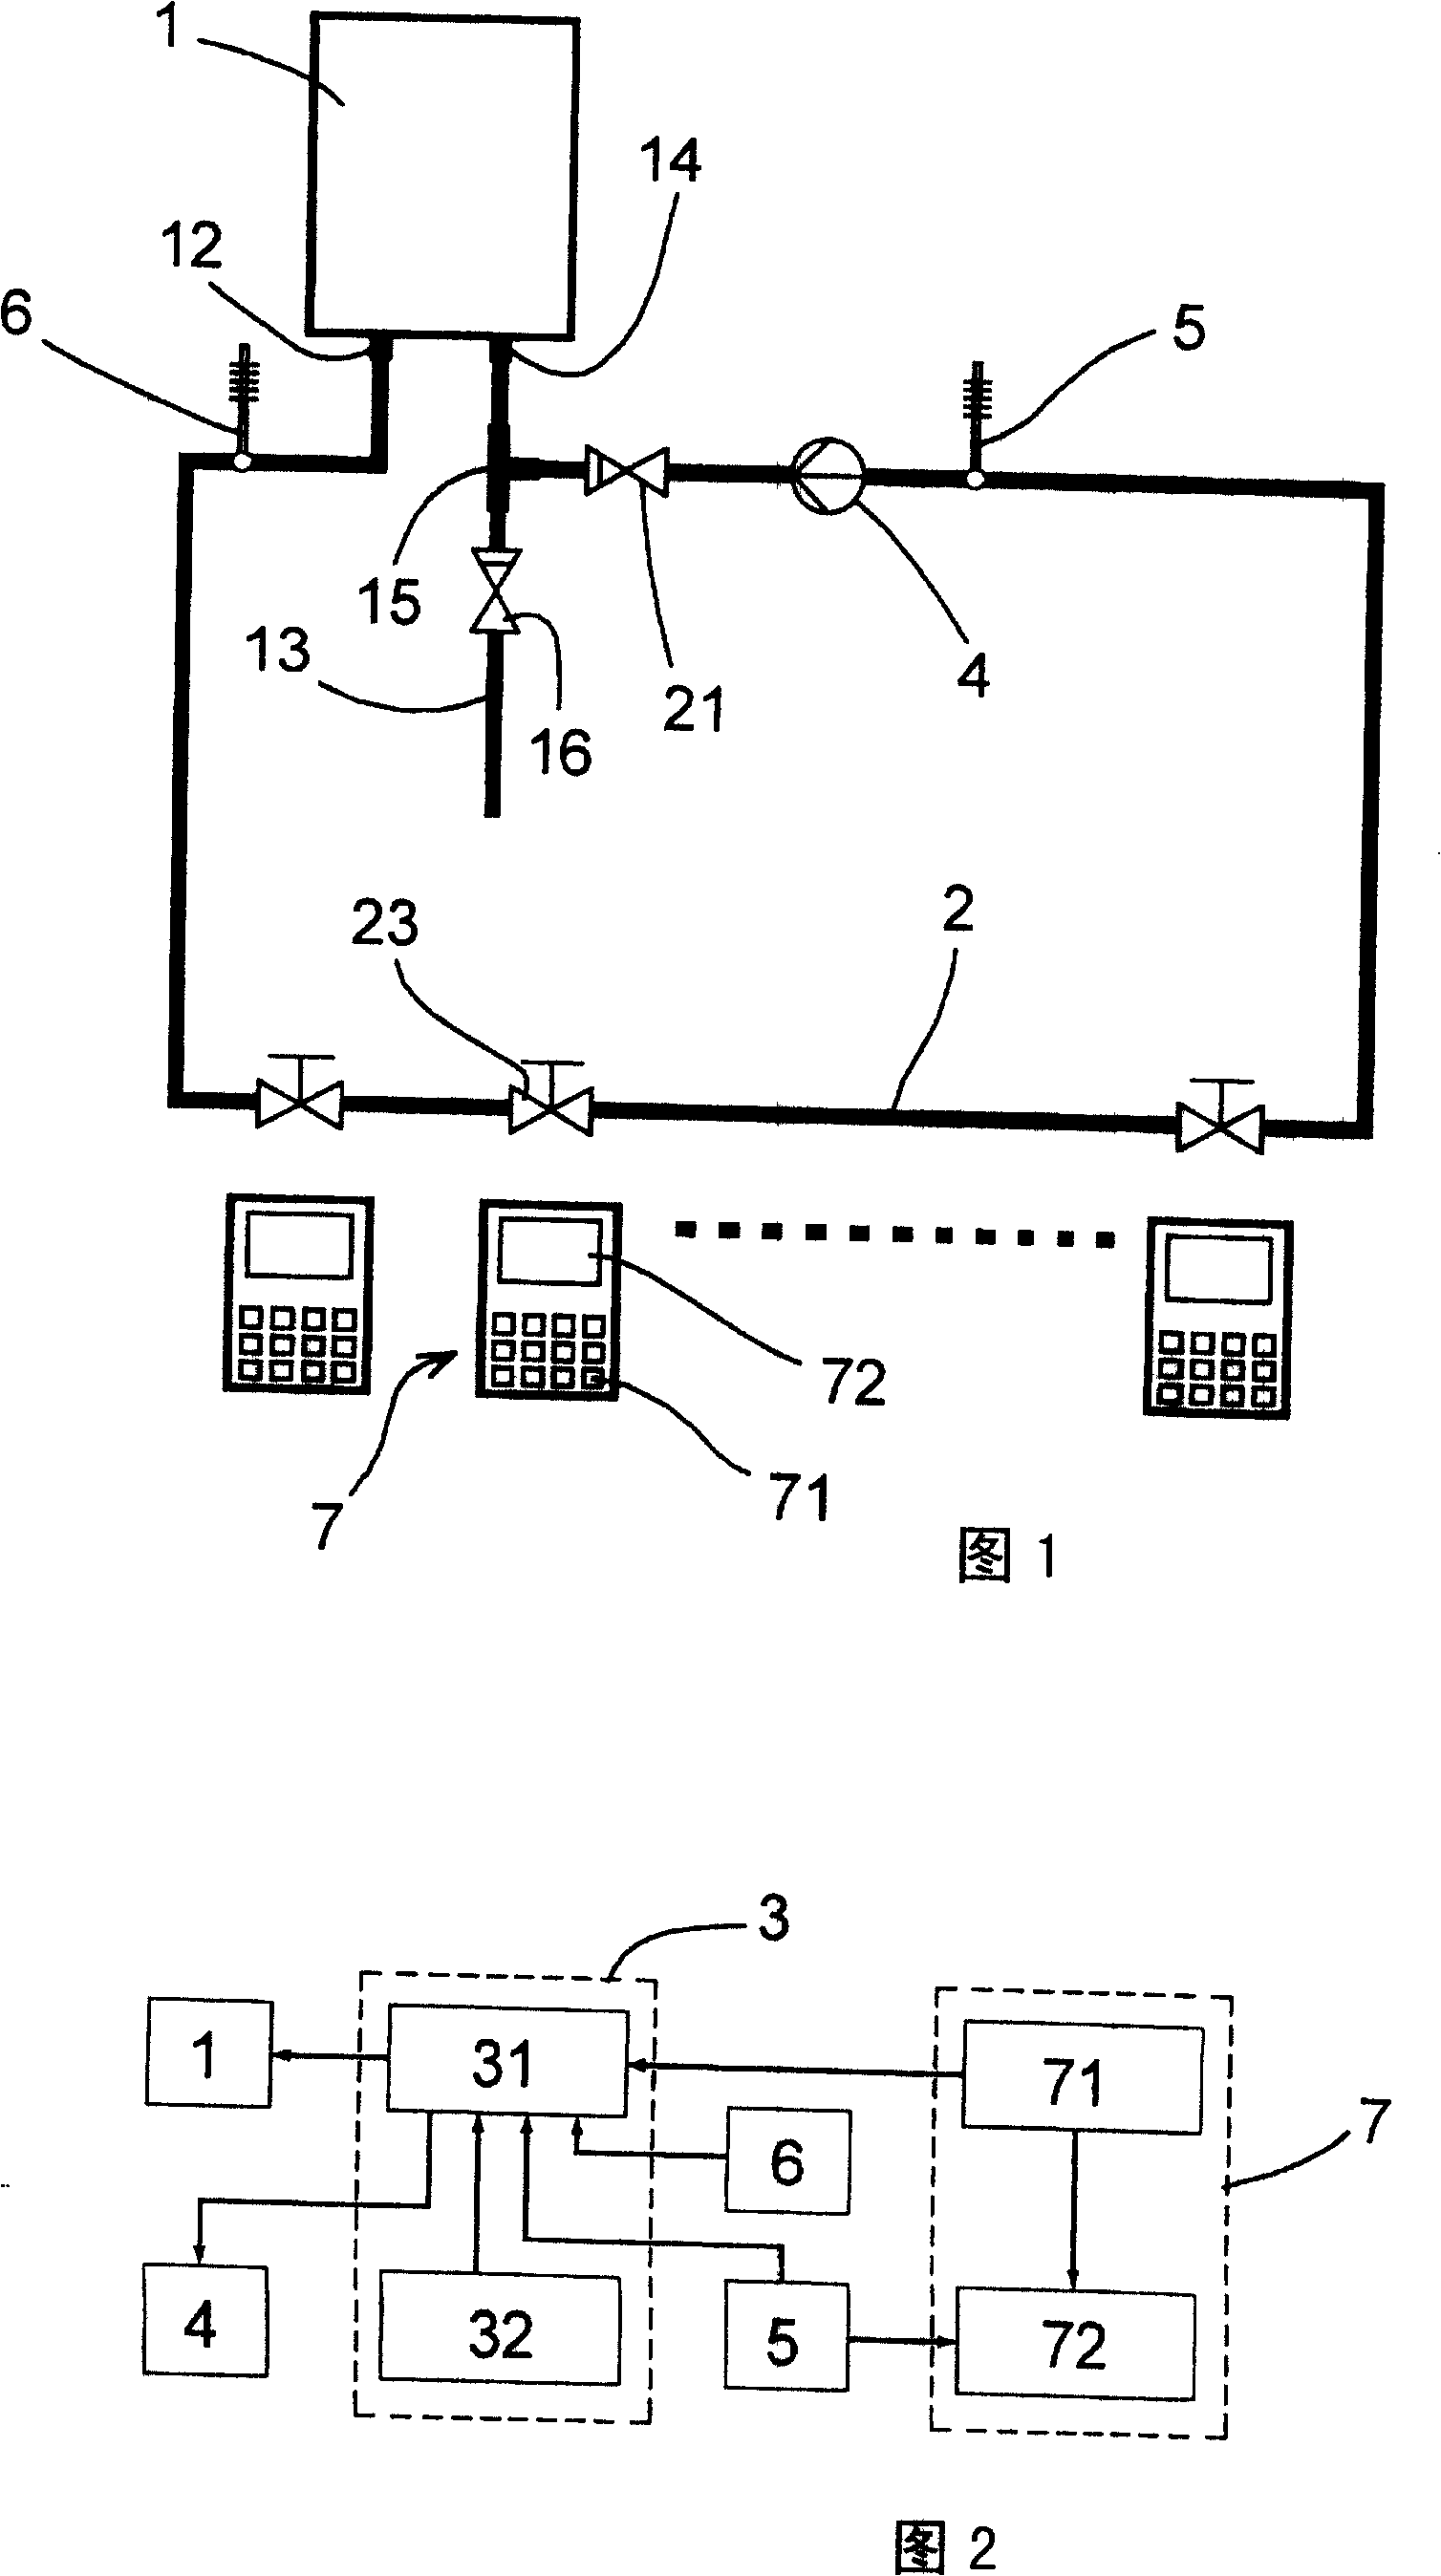 Hot-water supplying system